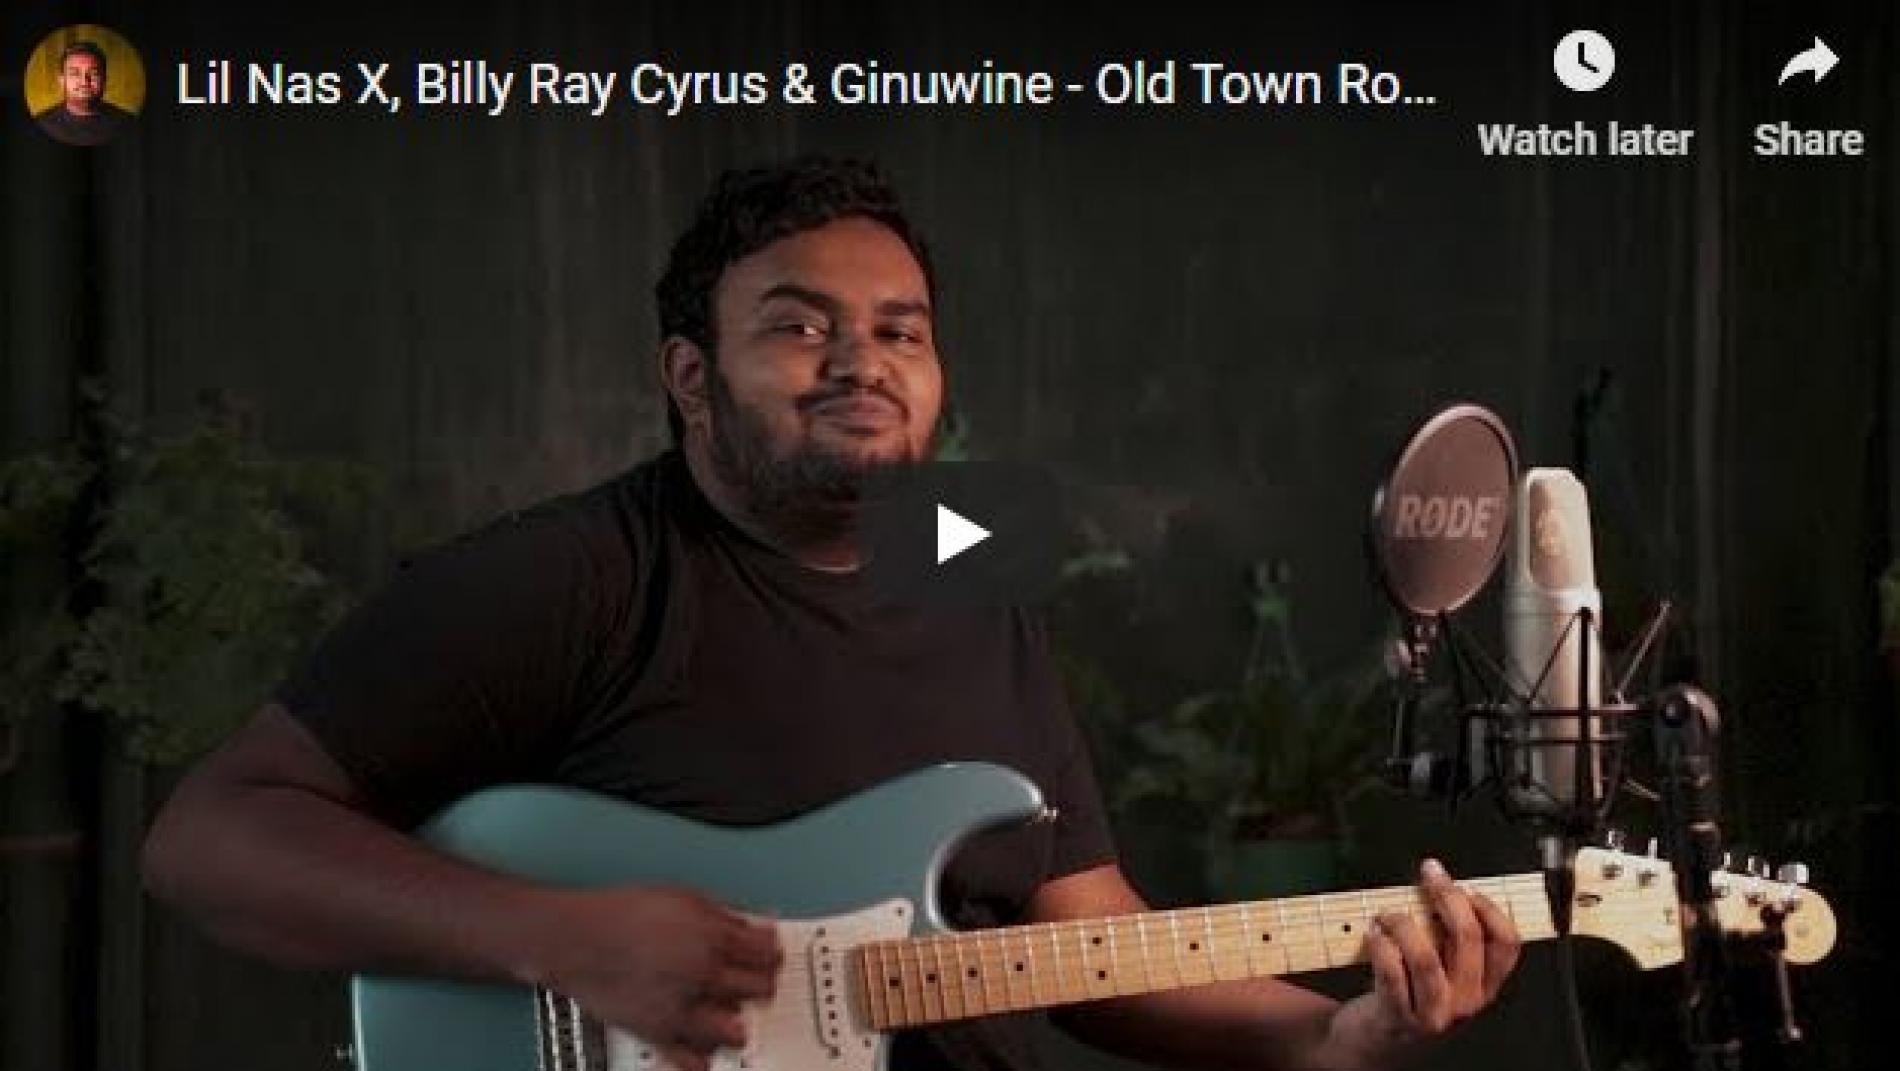 Lil Nas X, Billy Ray Cyrus & Ginuwine – Old Town Road & Pony (Cover) – Minesh Dissanayaka